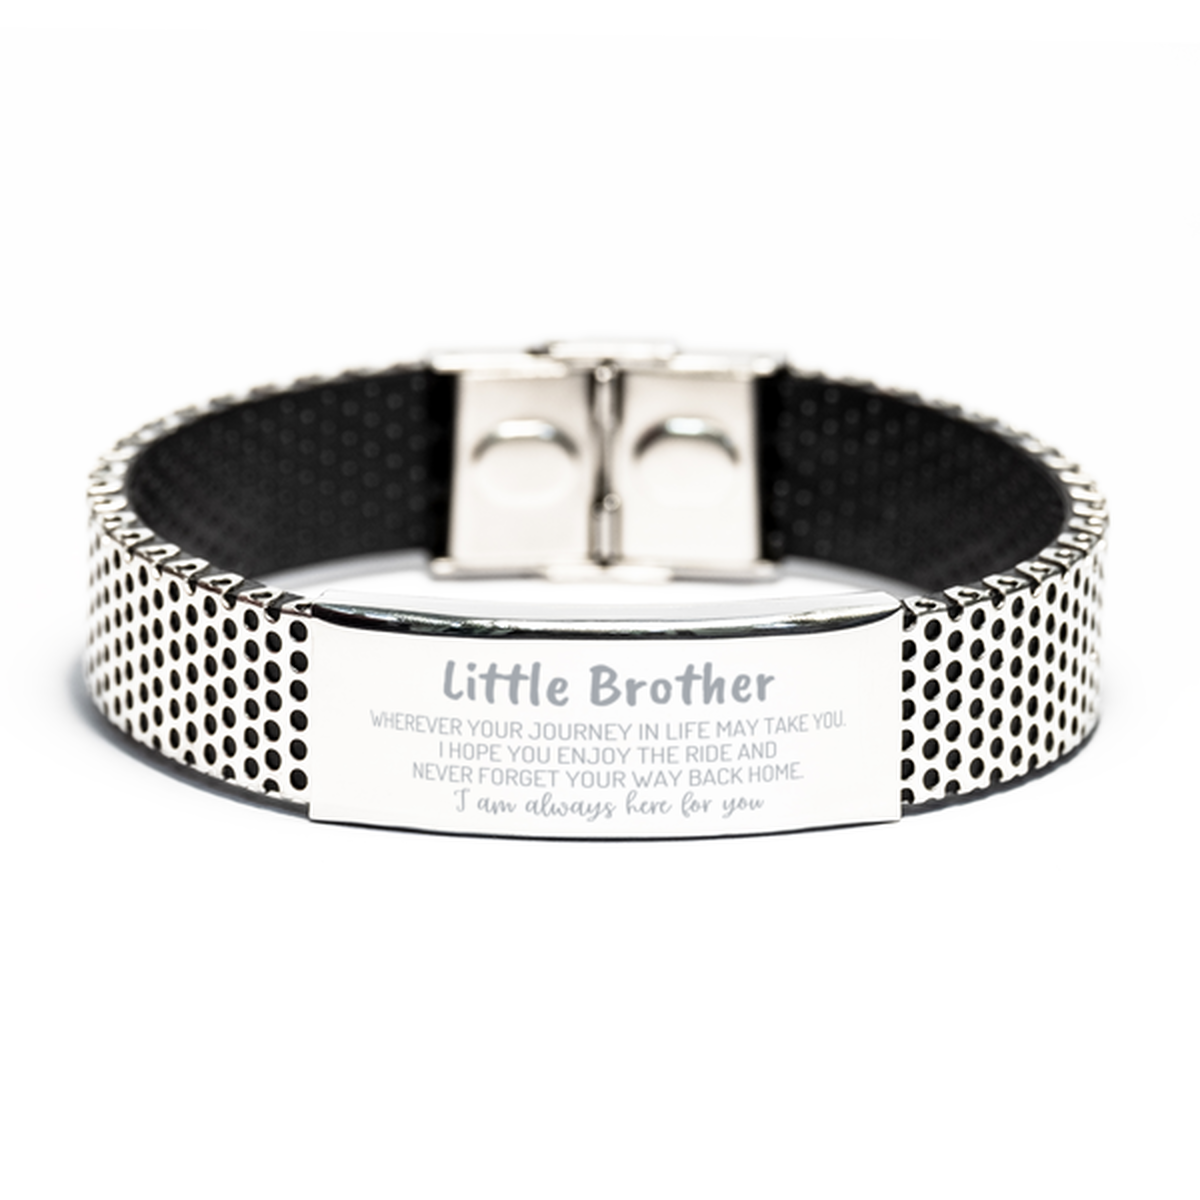 Little Brother wherever your journey in life may take you, I am always here for you Little Brother Stainless Steel Bracelet, Awesome Christmas Gifts For Little Brother, Little Brother Birthday Gifts for Men Women Family Loved One